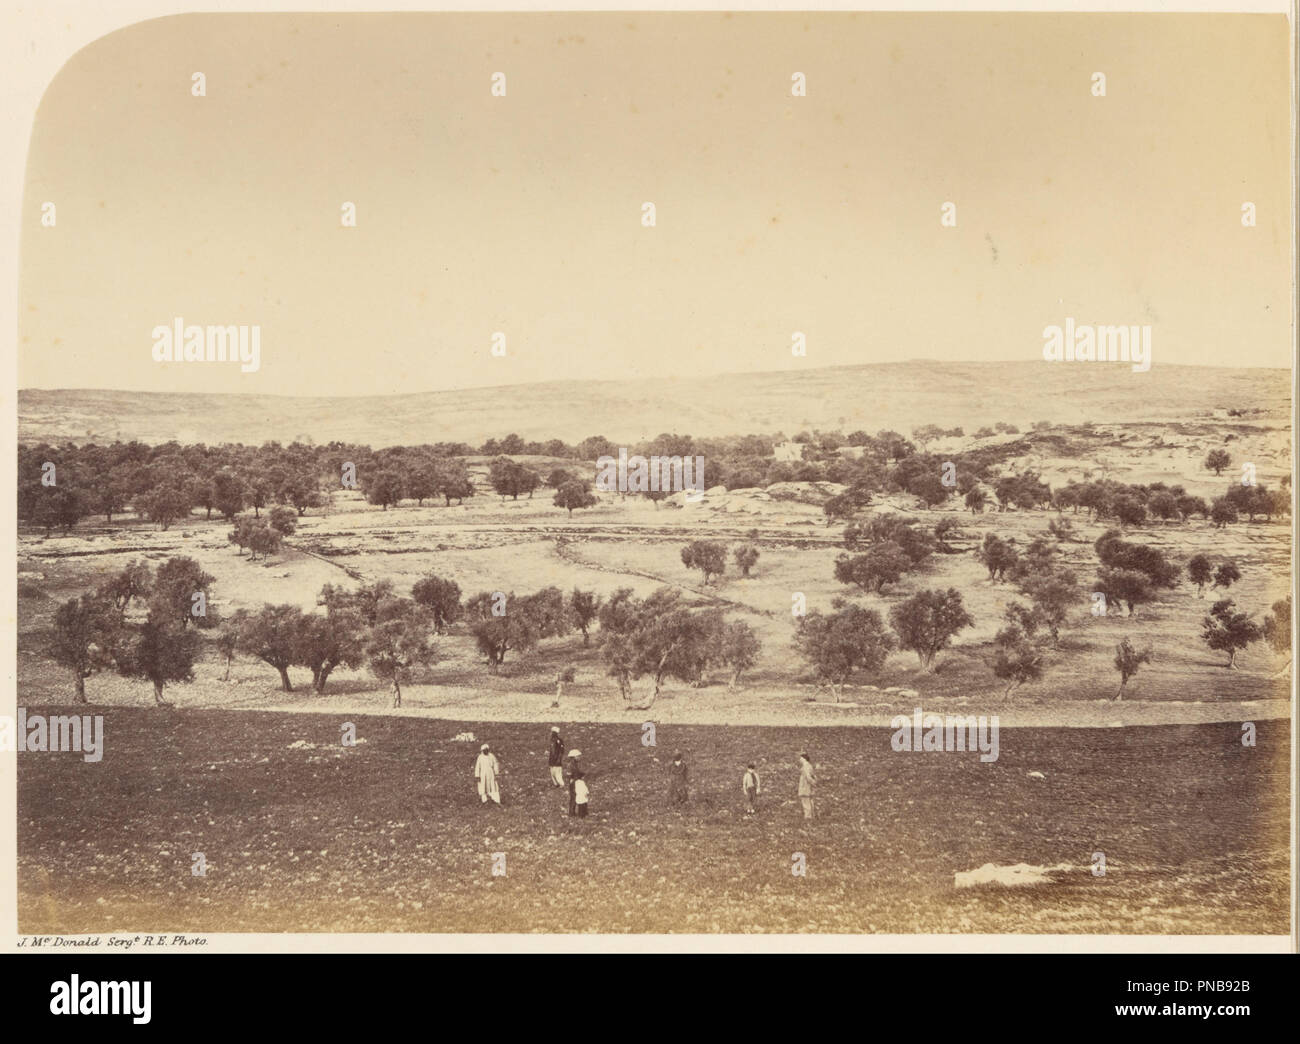 Panoramic View of the City: General View of the City &c. from the North. Date/Period: 1865. Print. Albumen silver. Height: 165 mm (6.49 in); Width: 230 mm (9.05 in). Author: Sgt. James M. McDonald. Stock Photo